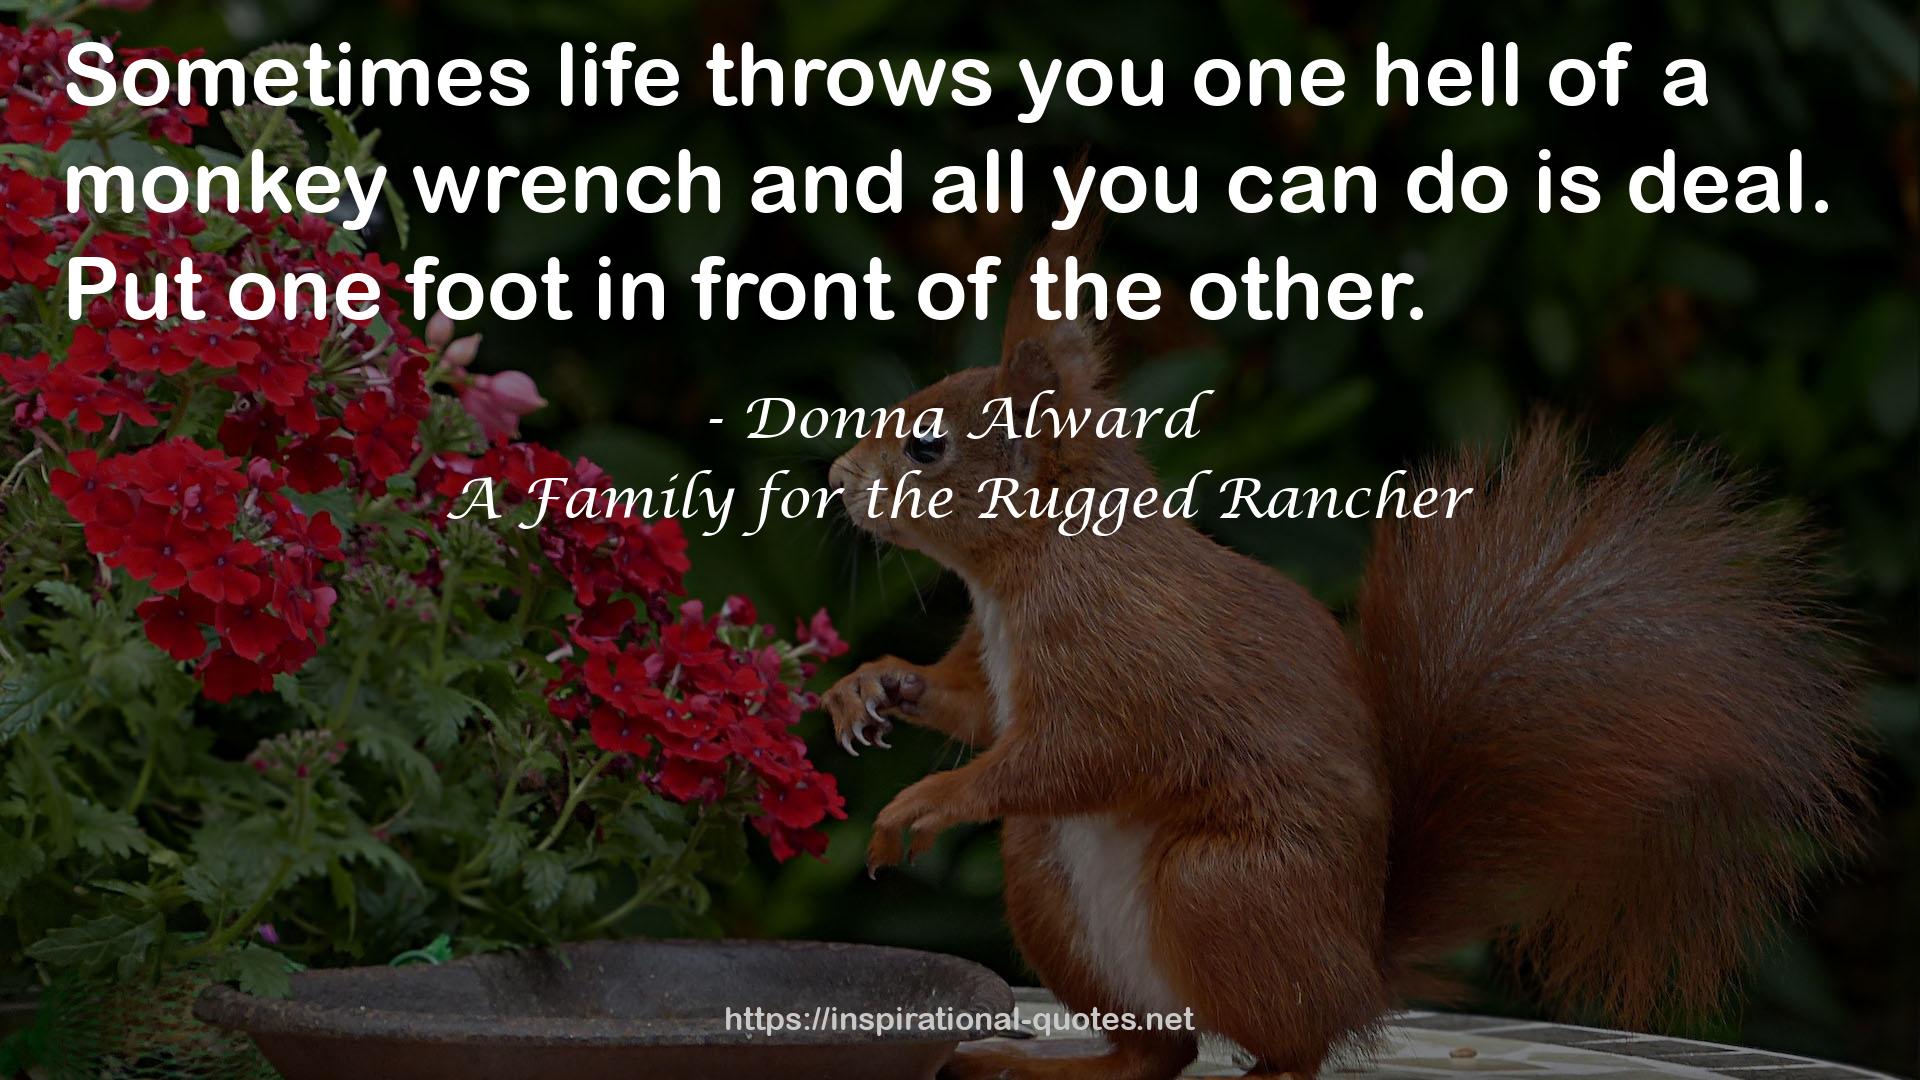 A Family for the Rugged Rancher QUOTES